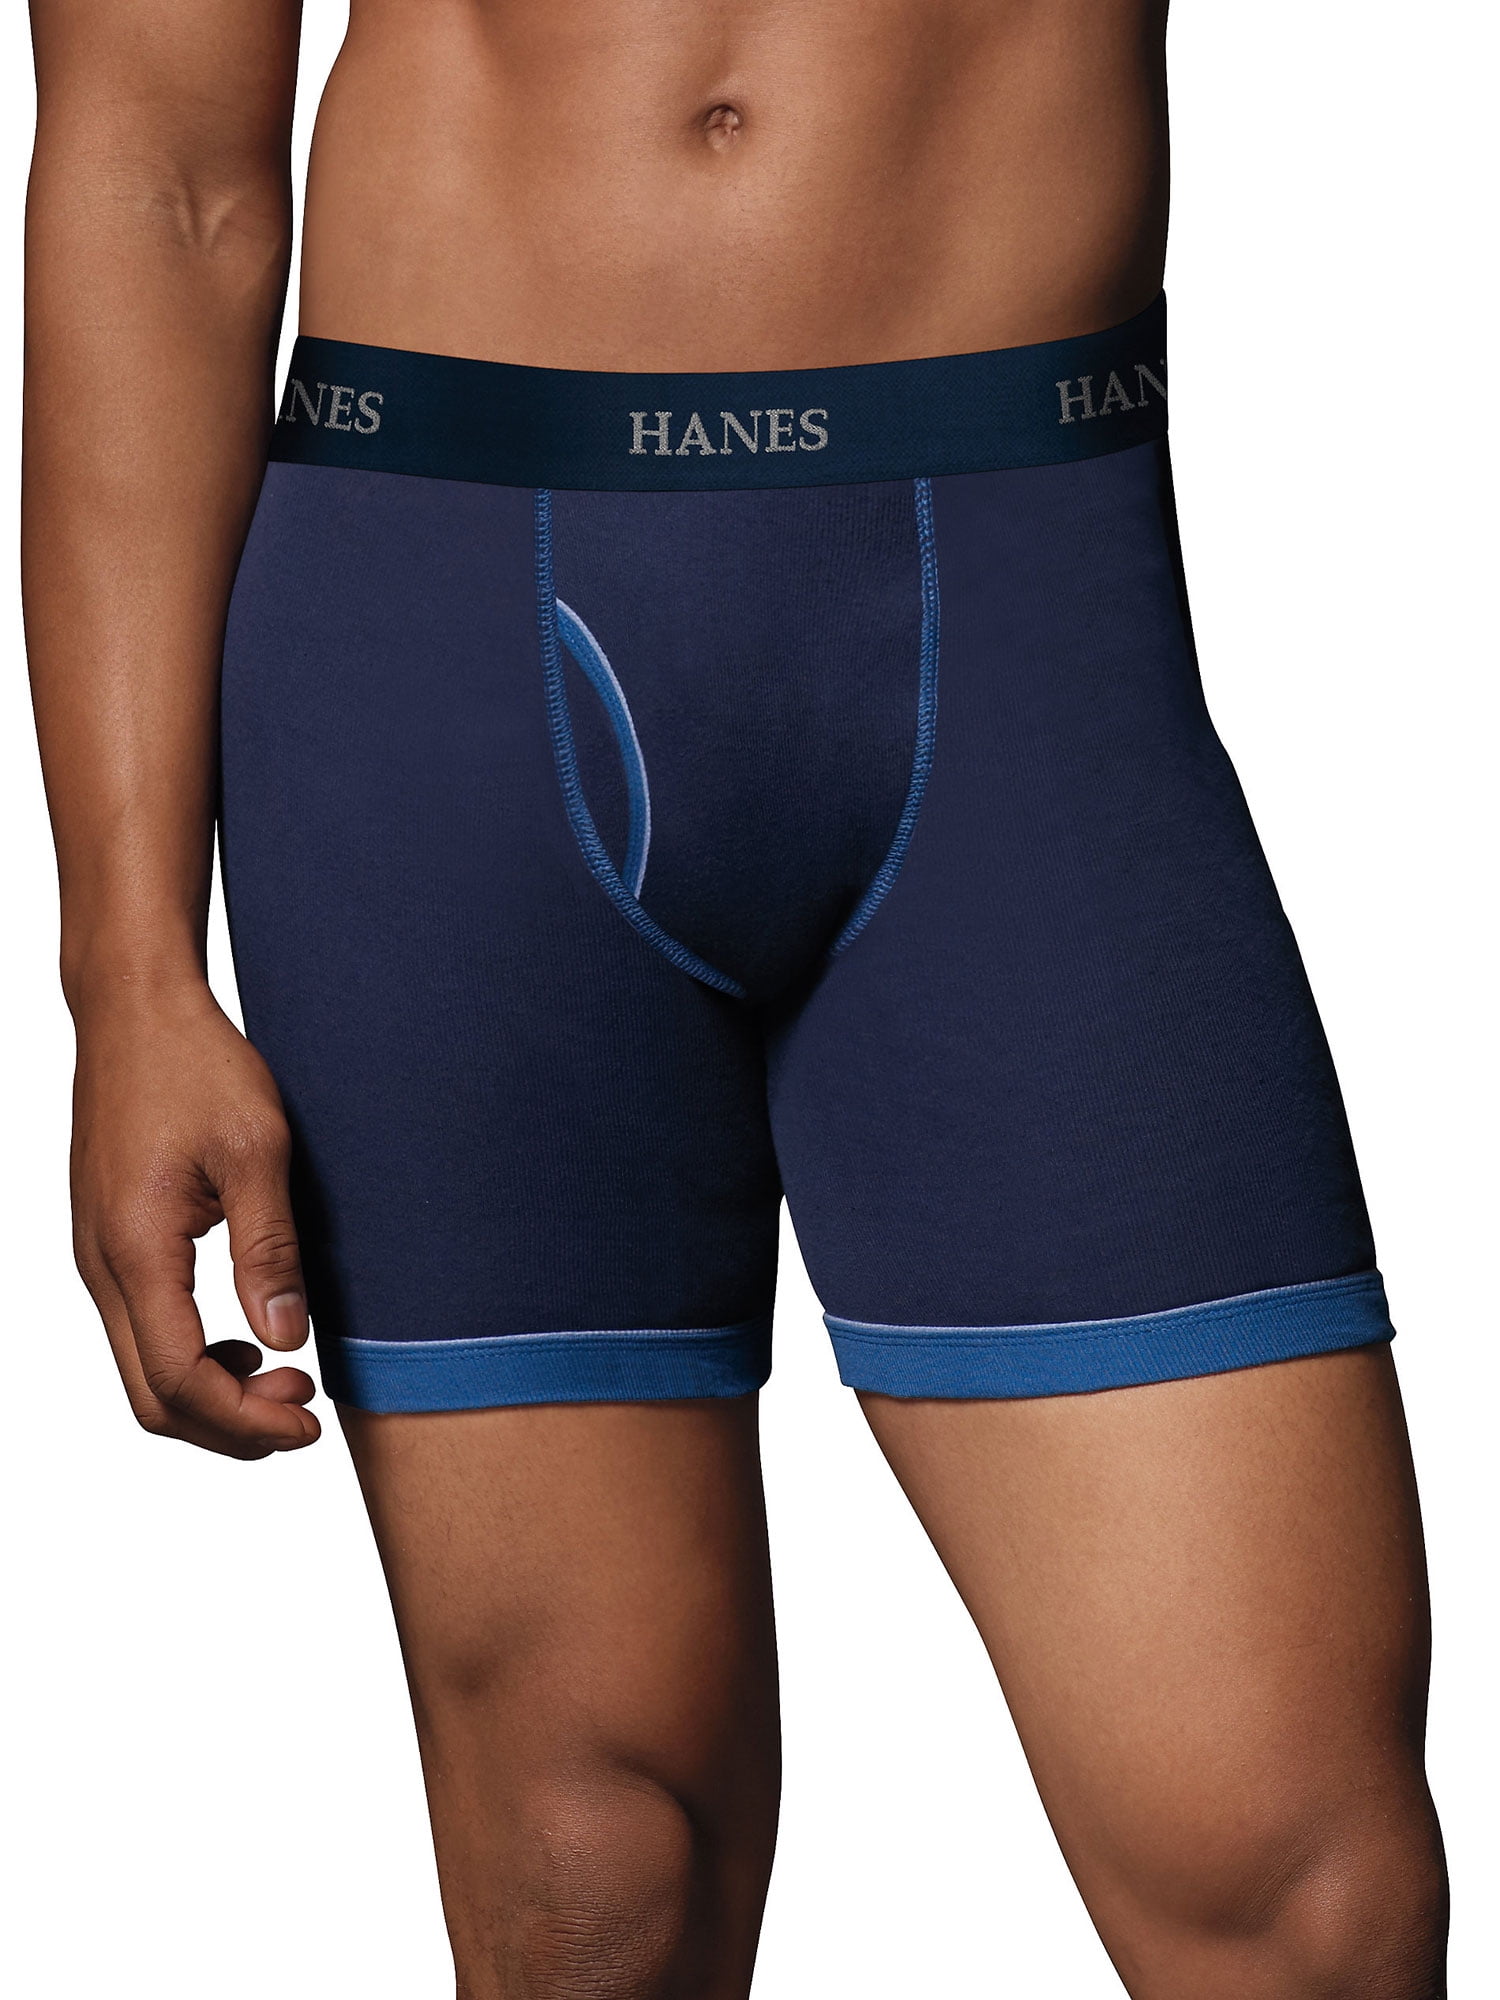 Hanes Mens Tagless Exposed Waistband Boxer Briefs